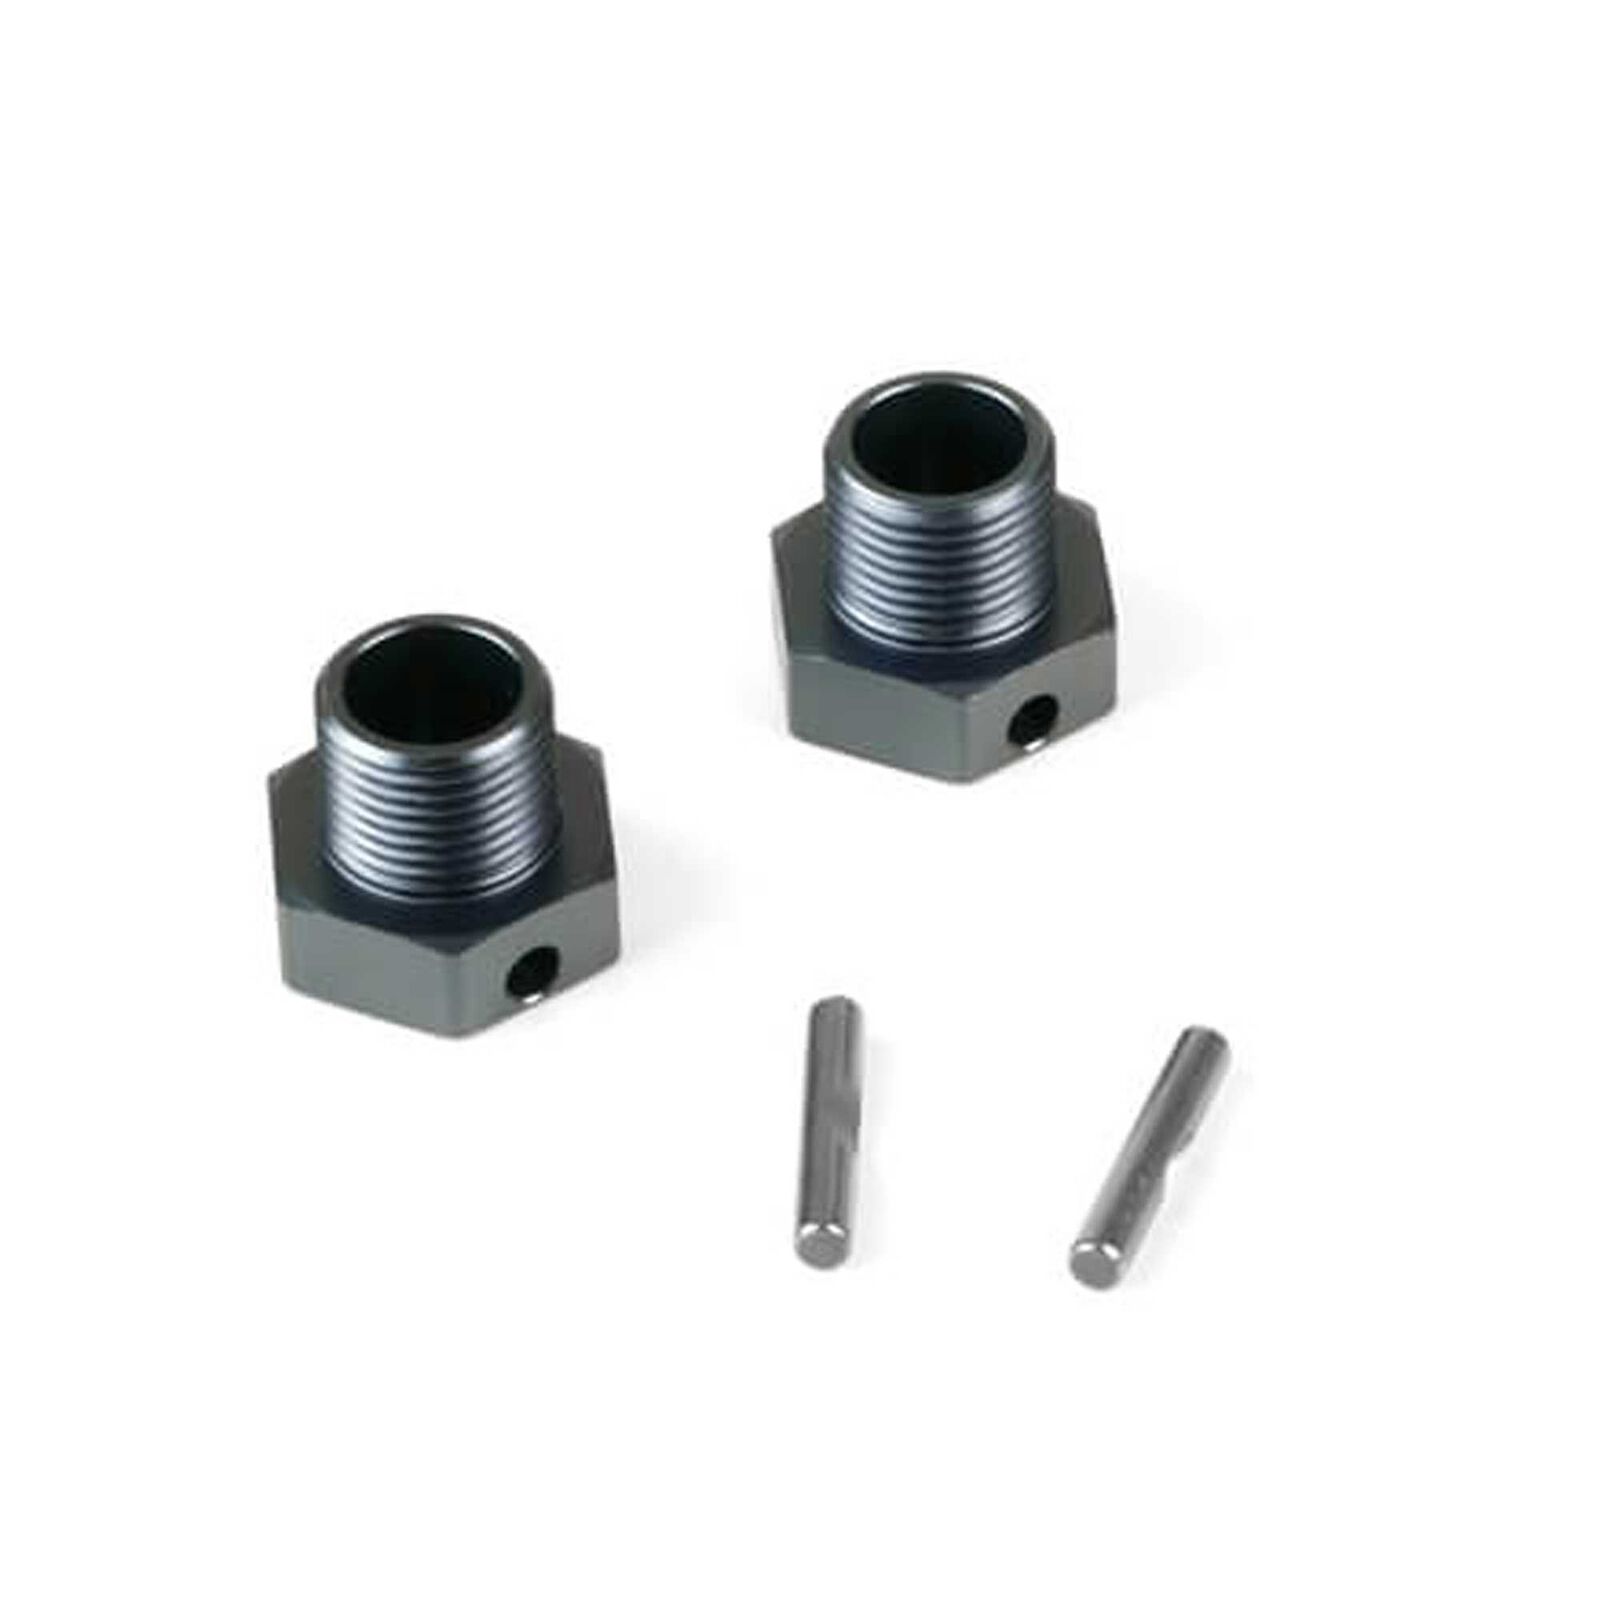 Wheel Hubs with Pins, +2mm offset, 17mm (2)